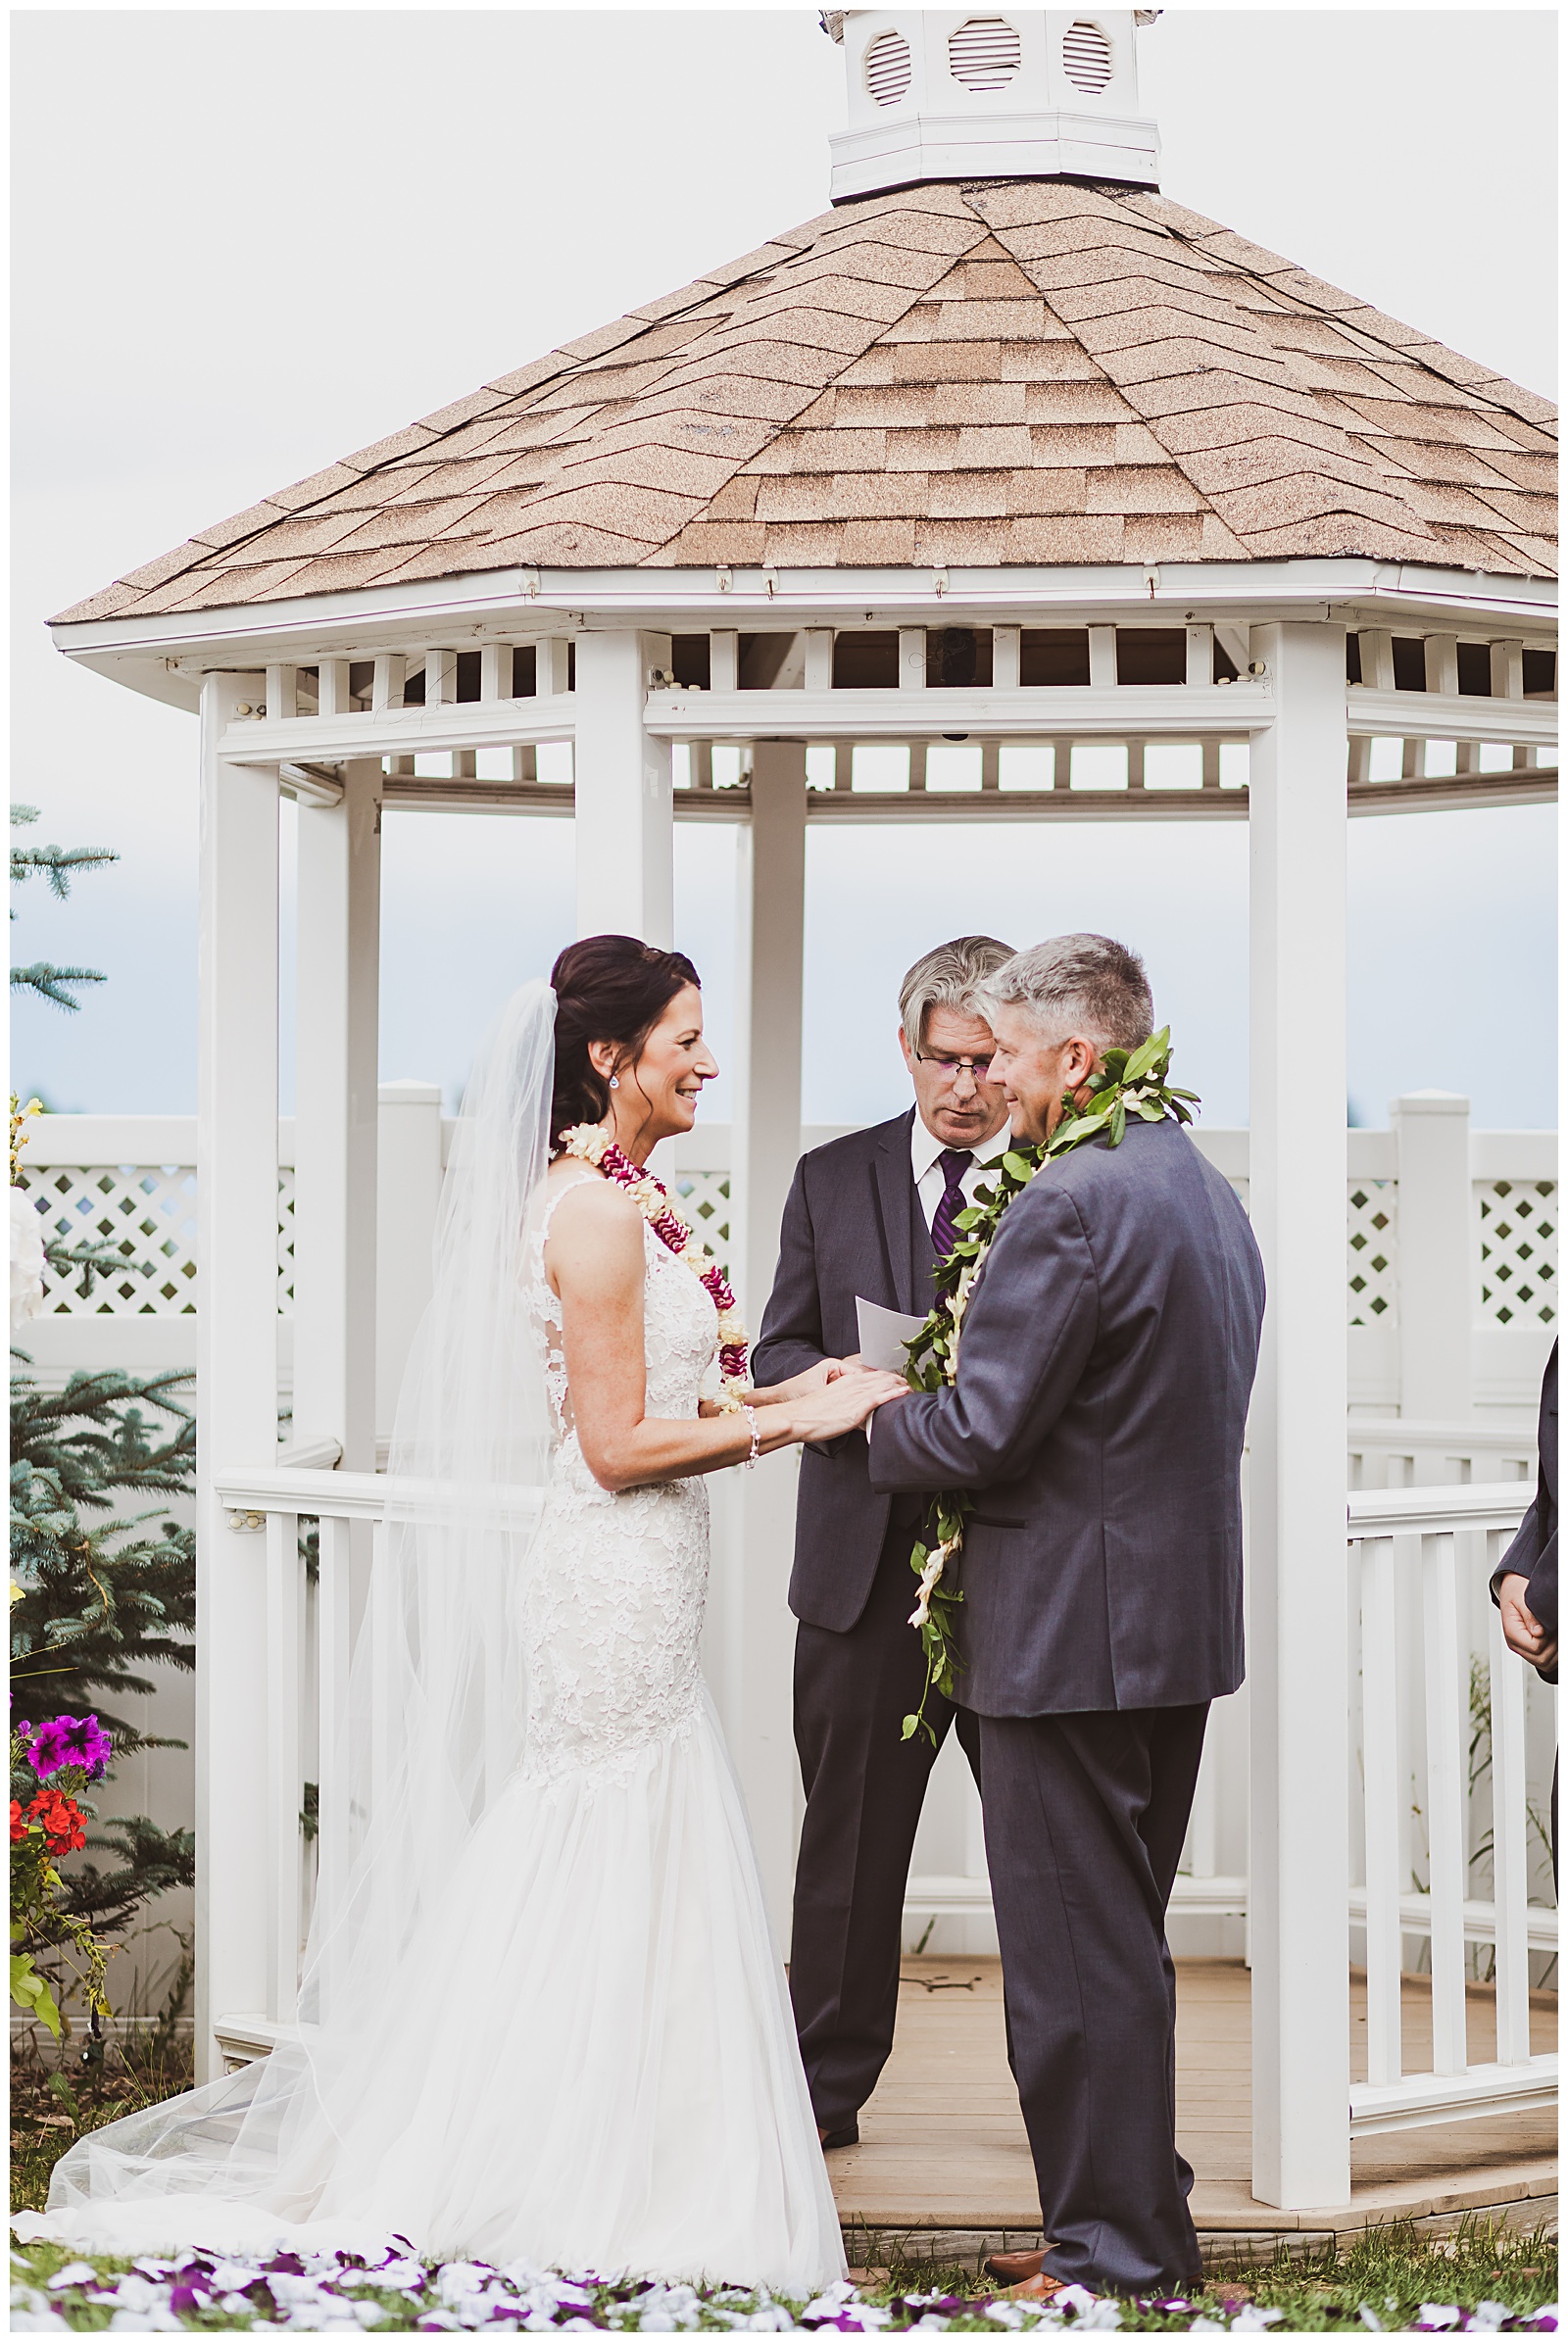 bride and groom in front of gazebo